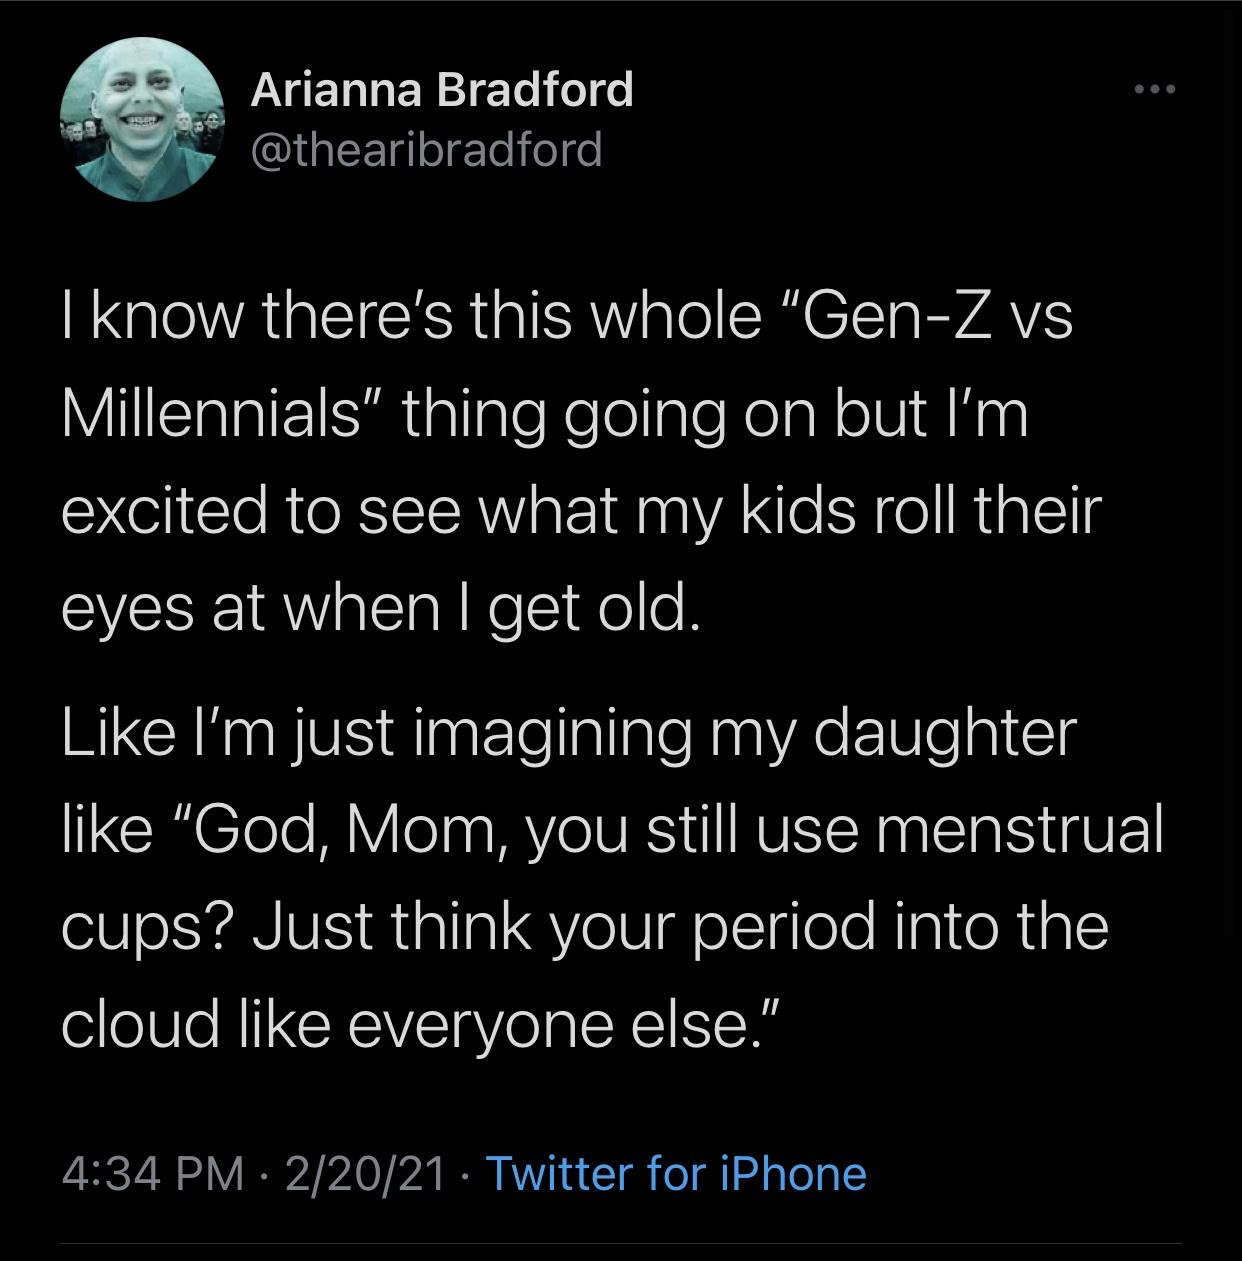 atmosphere - Arianna Bradford I know there's this whole "GenZ vs Millennials thing going on but I'm excited to see what my kids roll their eyes at when I get old. I'm just imagining my daughter "God, Mom, you still use menstrual cups? Just think your peri